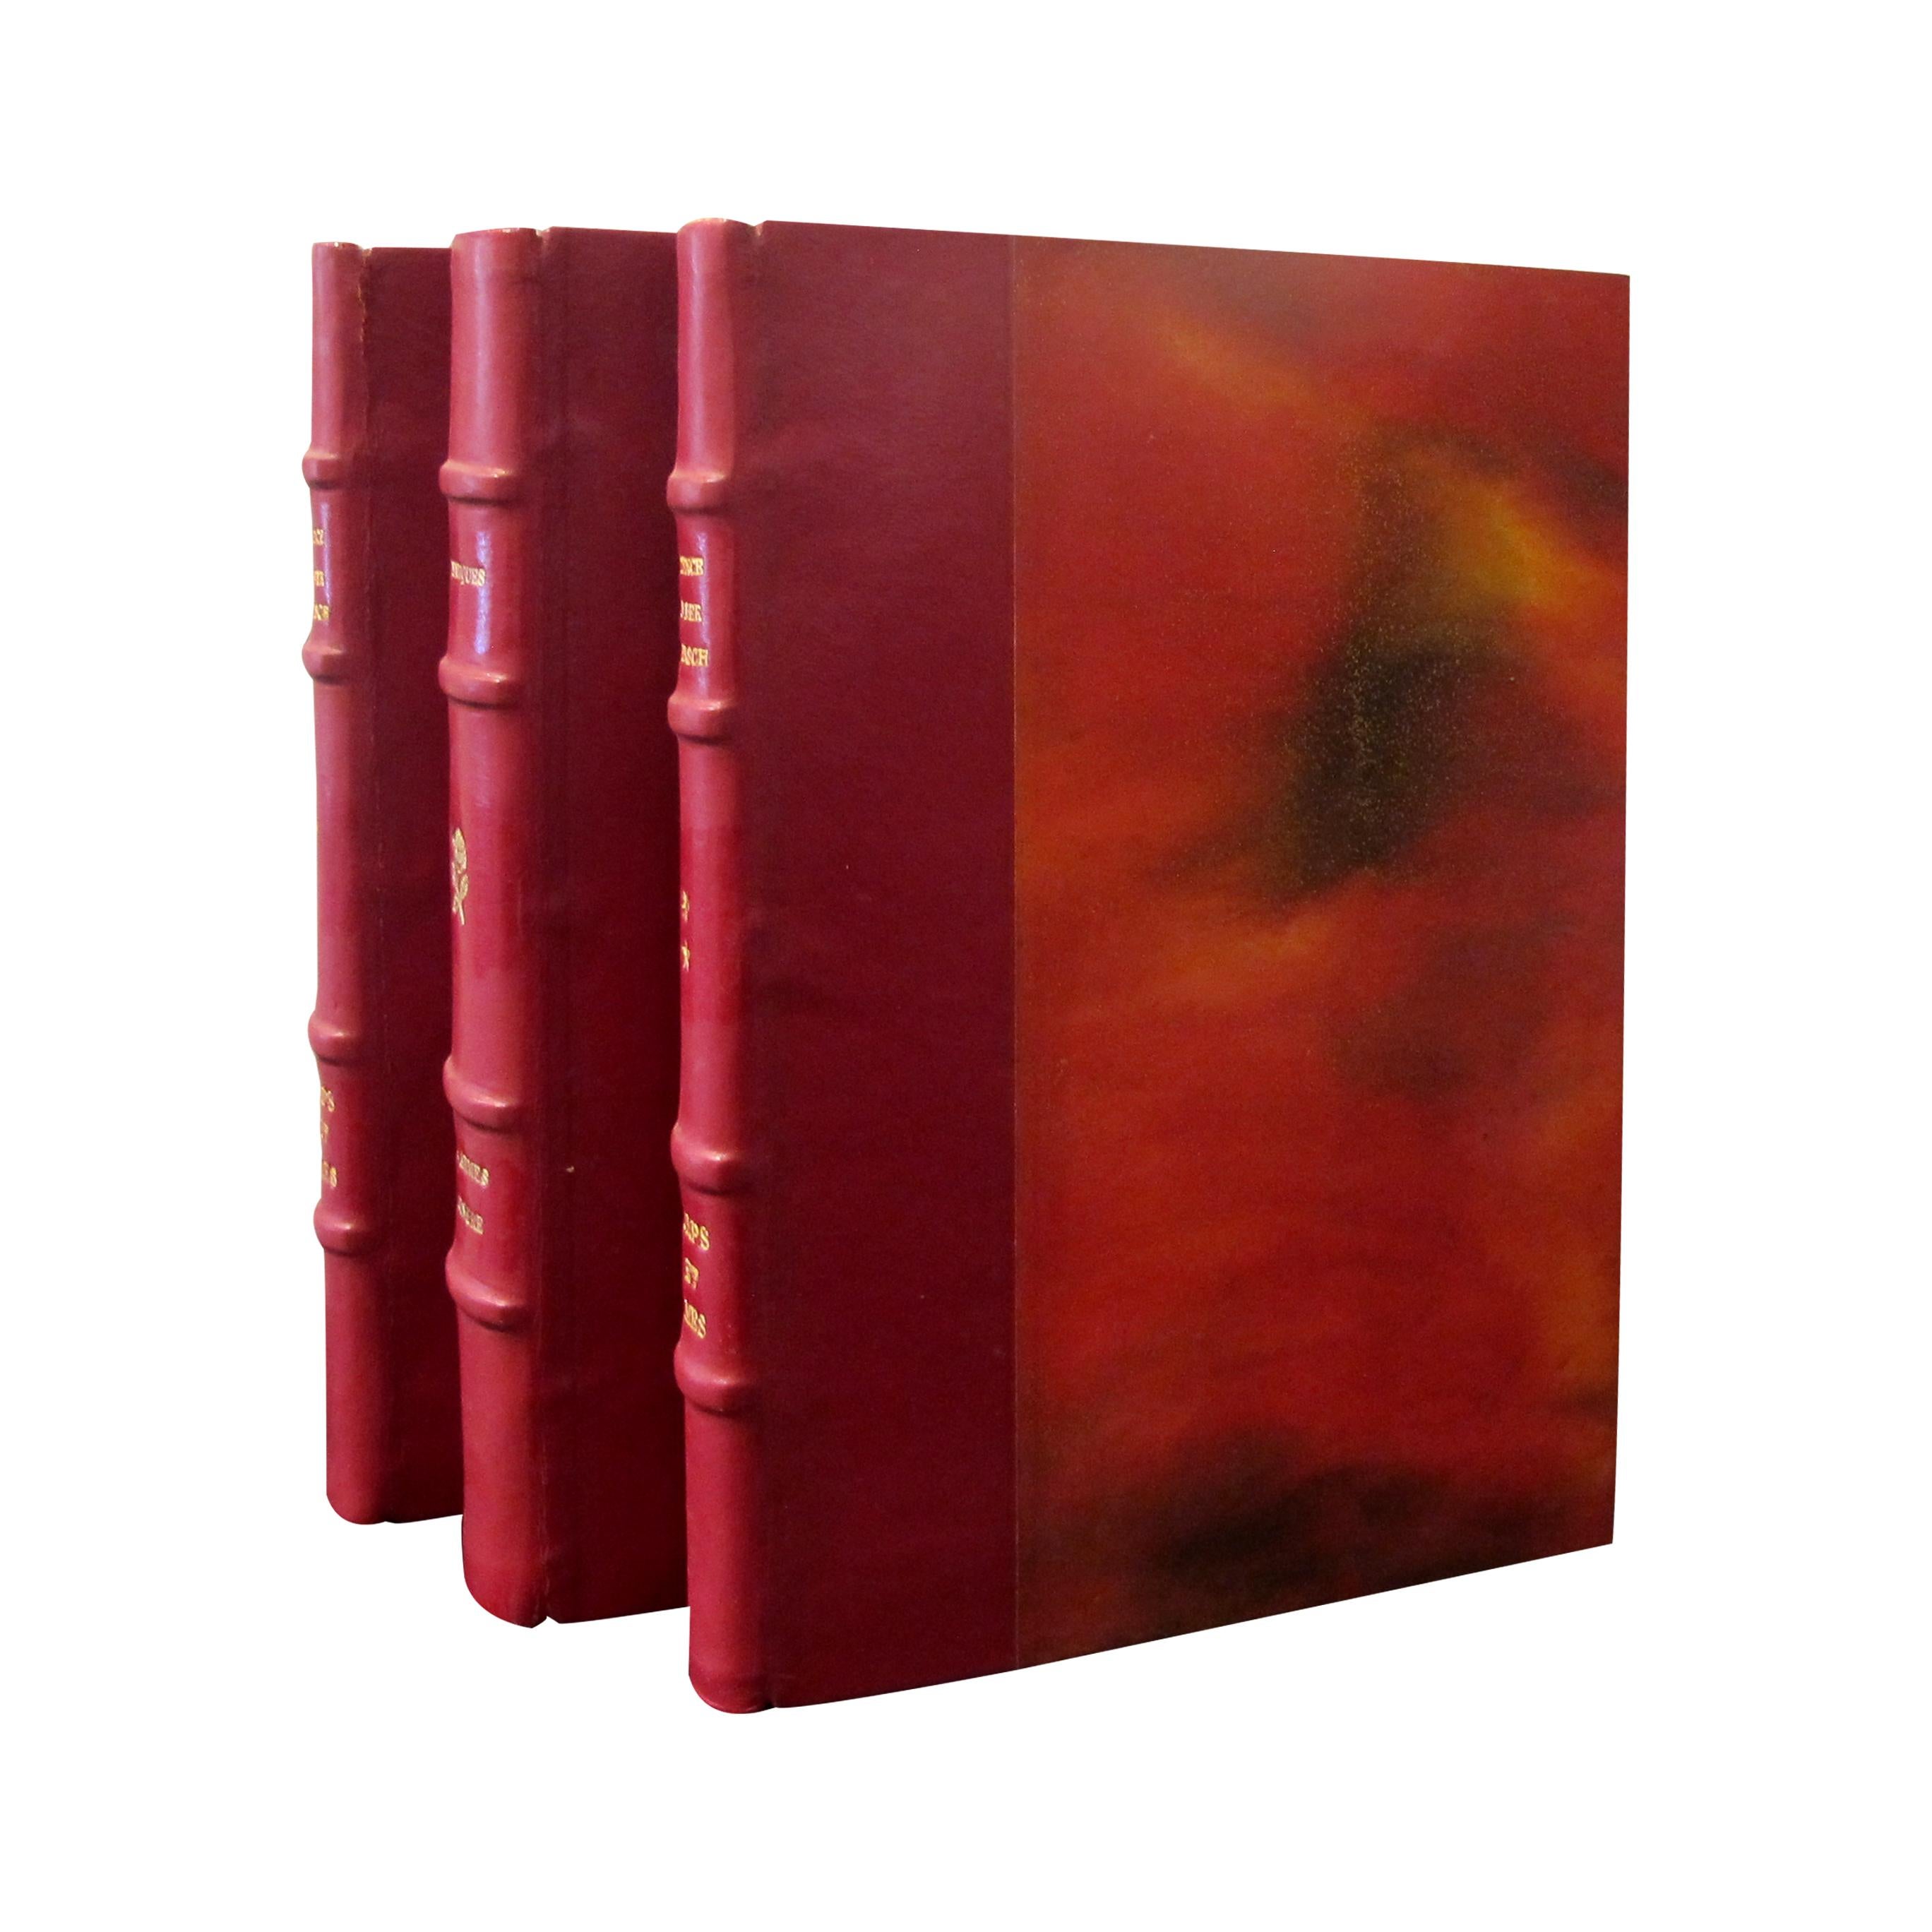 Mid-Century Modern Set of 19 Early 20th Century French Novel Books Bound in Red Leather 1920s-1960s